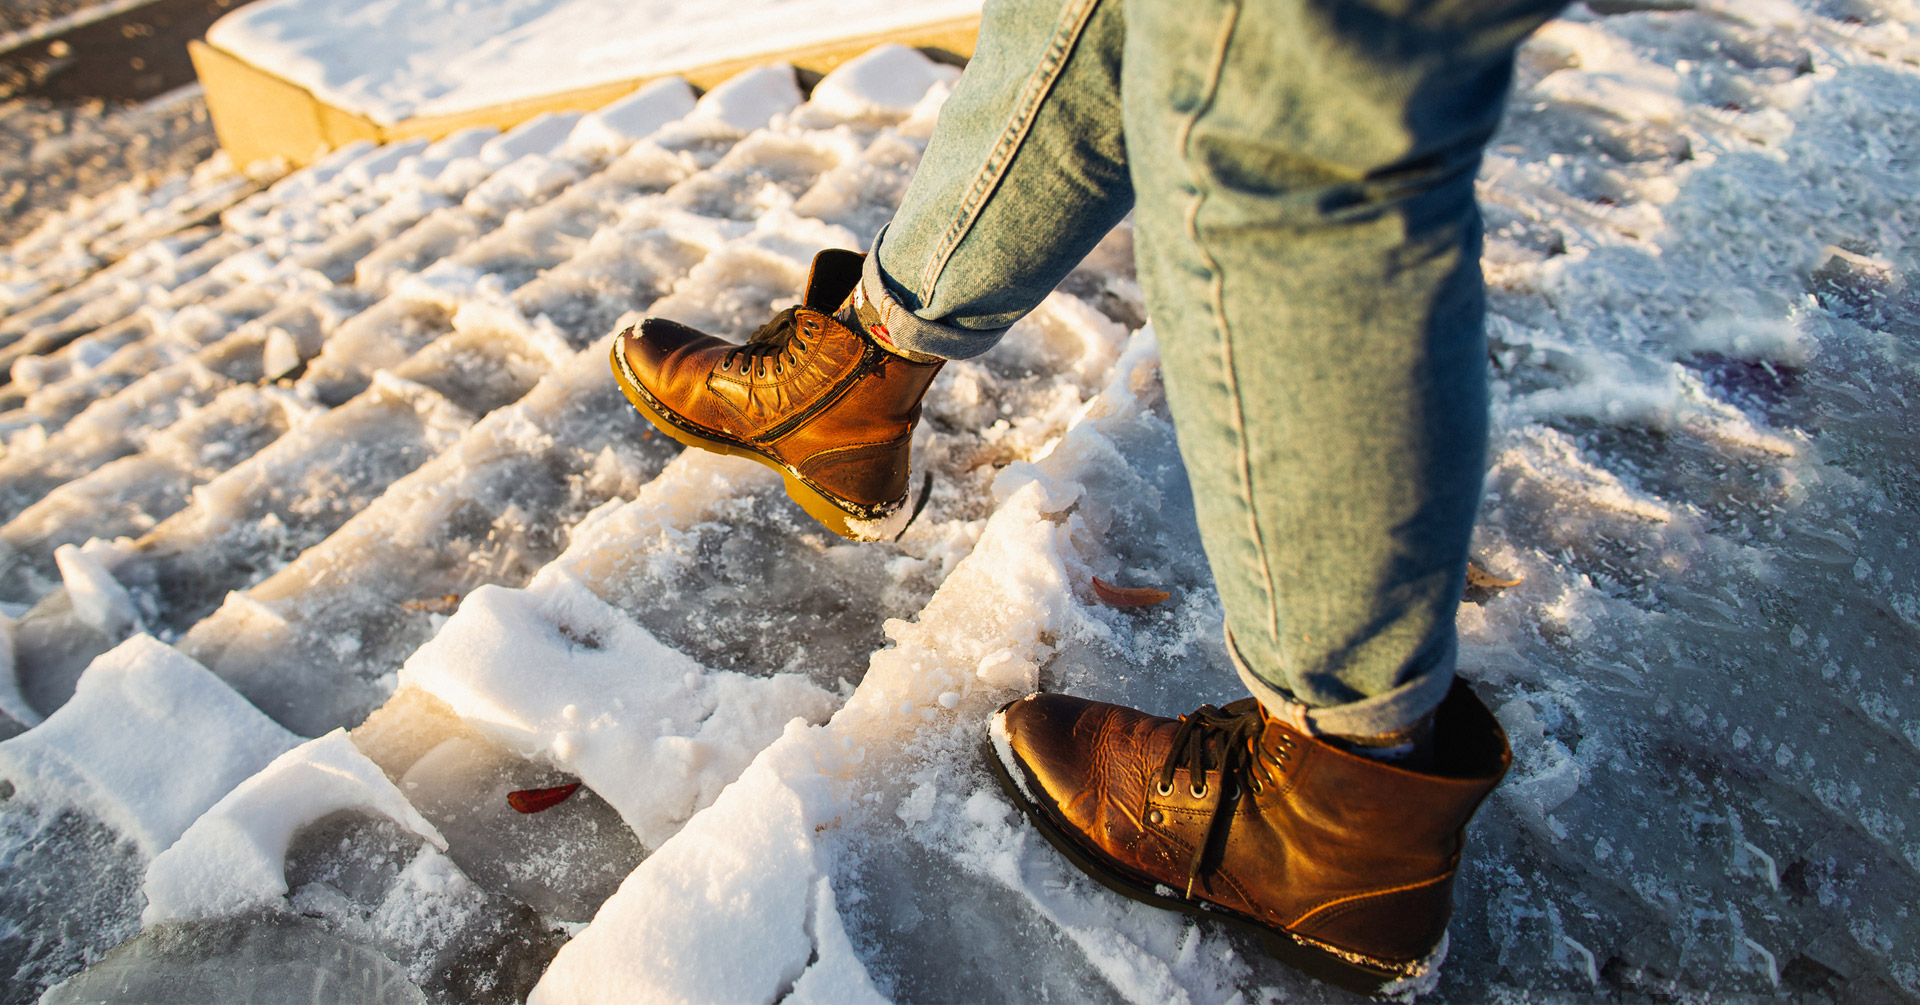 Safety Tips for Stairways to Prevent Slips, Trips and Falls